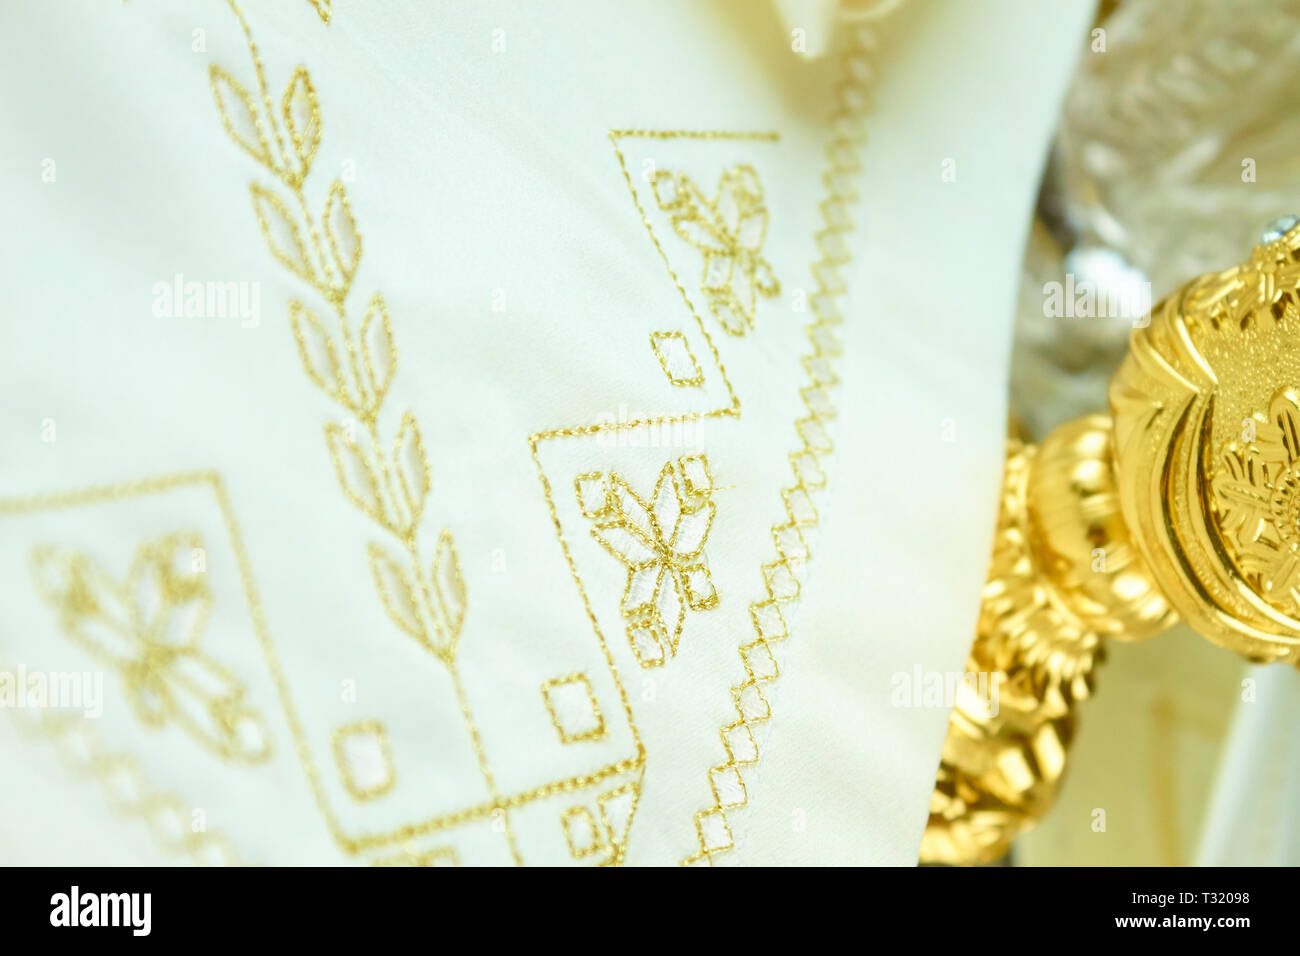 royal golden embroidery on white towel Stock Photo